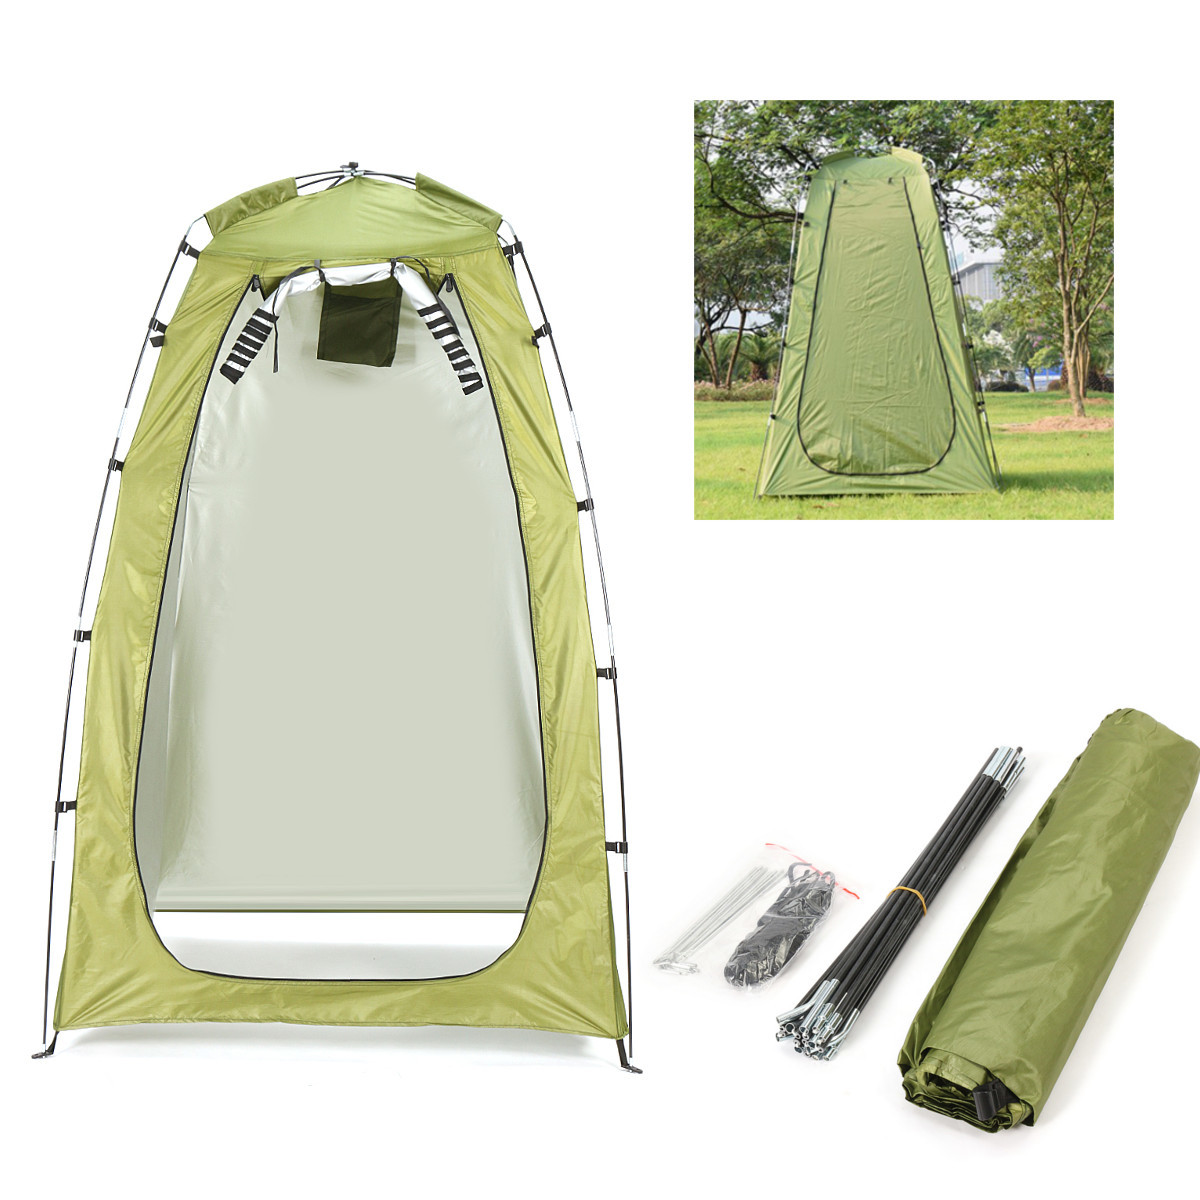 Outdoor Portable Fishing Tent Camping Shower Bathroom Toilet Changing Room 1